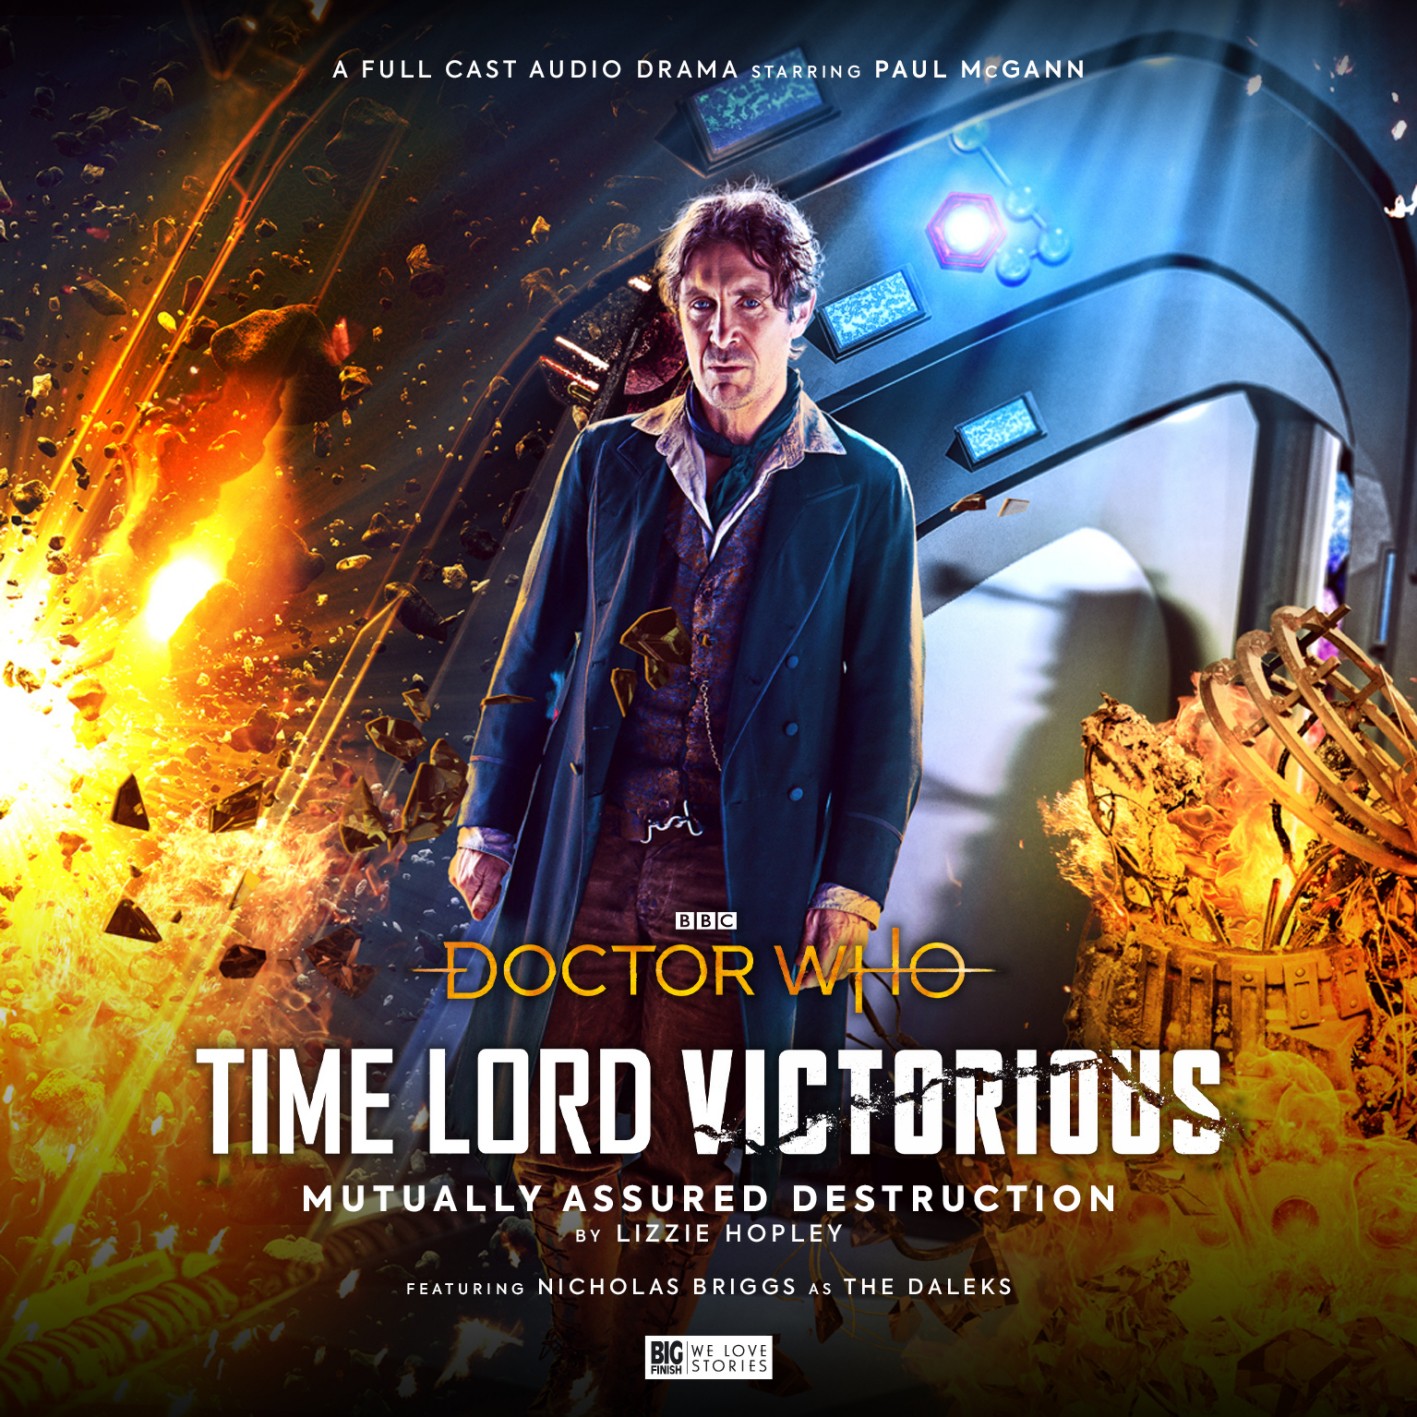 DOCTOR WHO - TIME LORD VICTORIOUS MUTUALLY ASSURED DISTRUCTION BY LIZZIE HOPLEY BIG FINISH AUDIO DRAMA PAUL MCGANN DALEKS NICHOLAS BRIGGS TIME MADE OF STRAWBERRIES